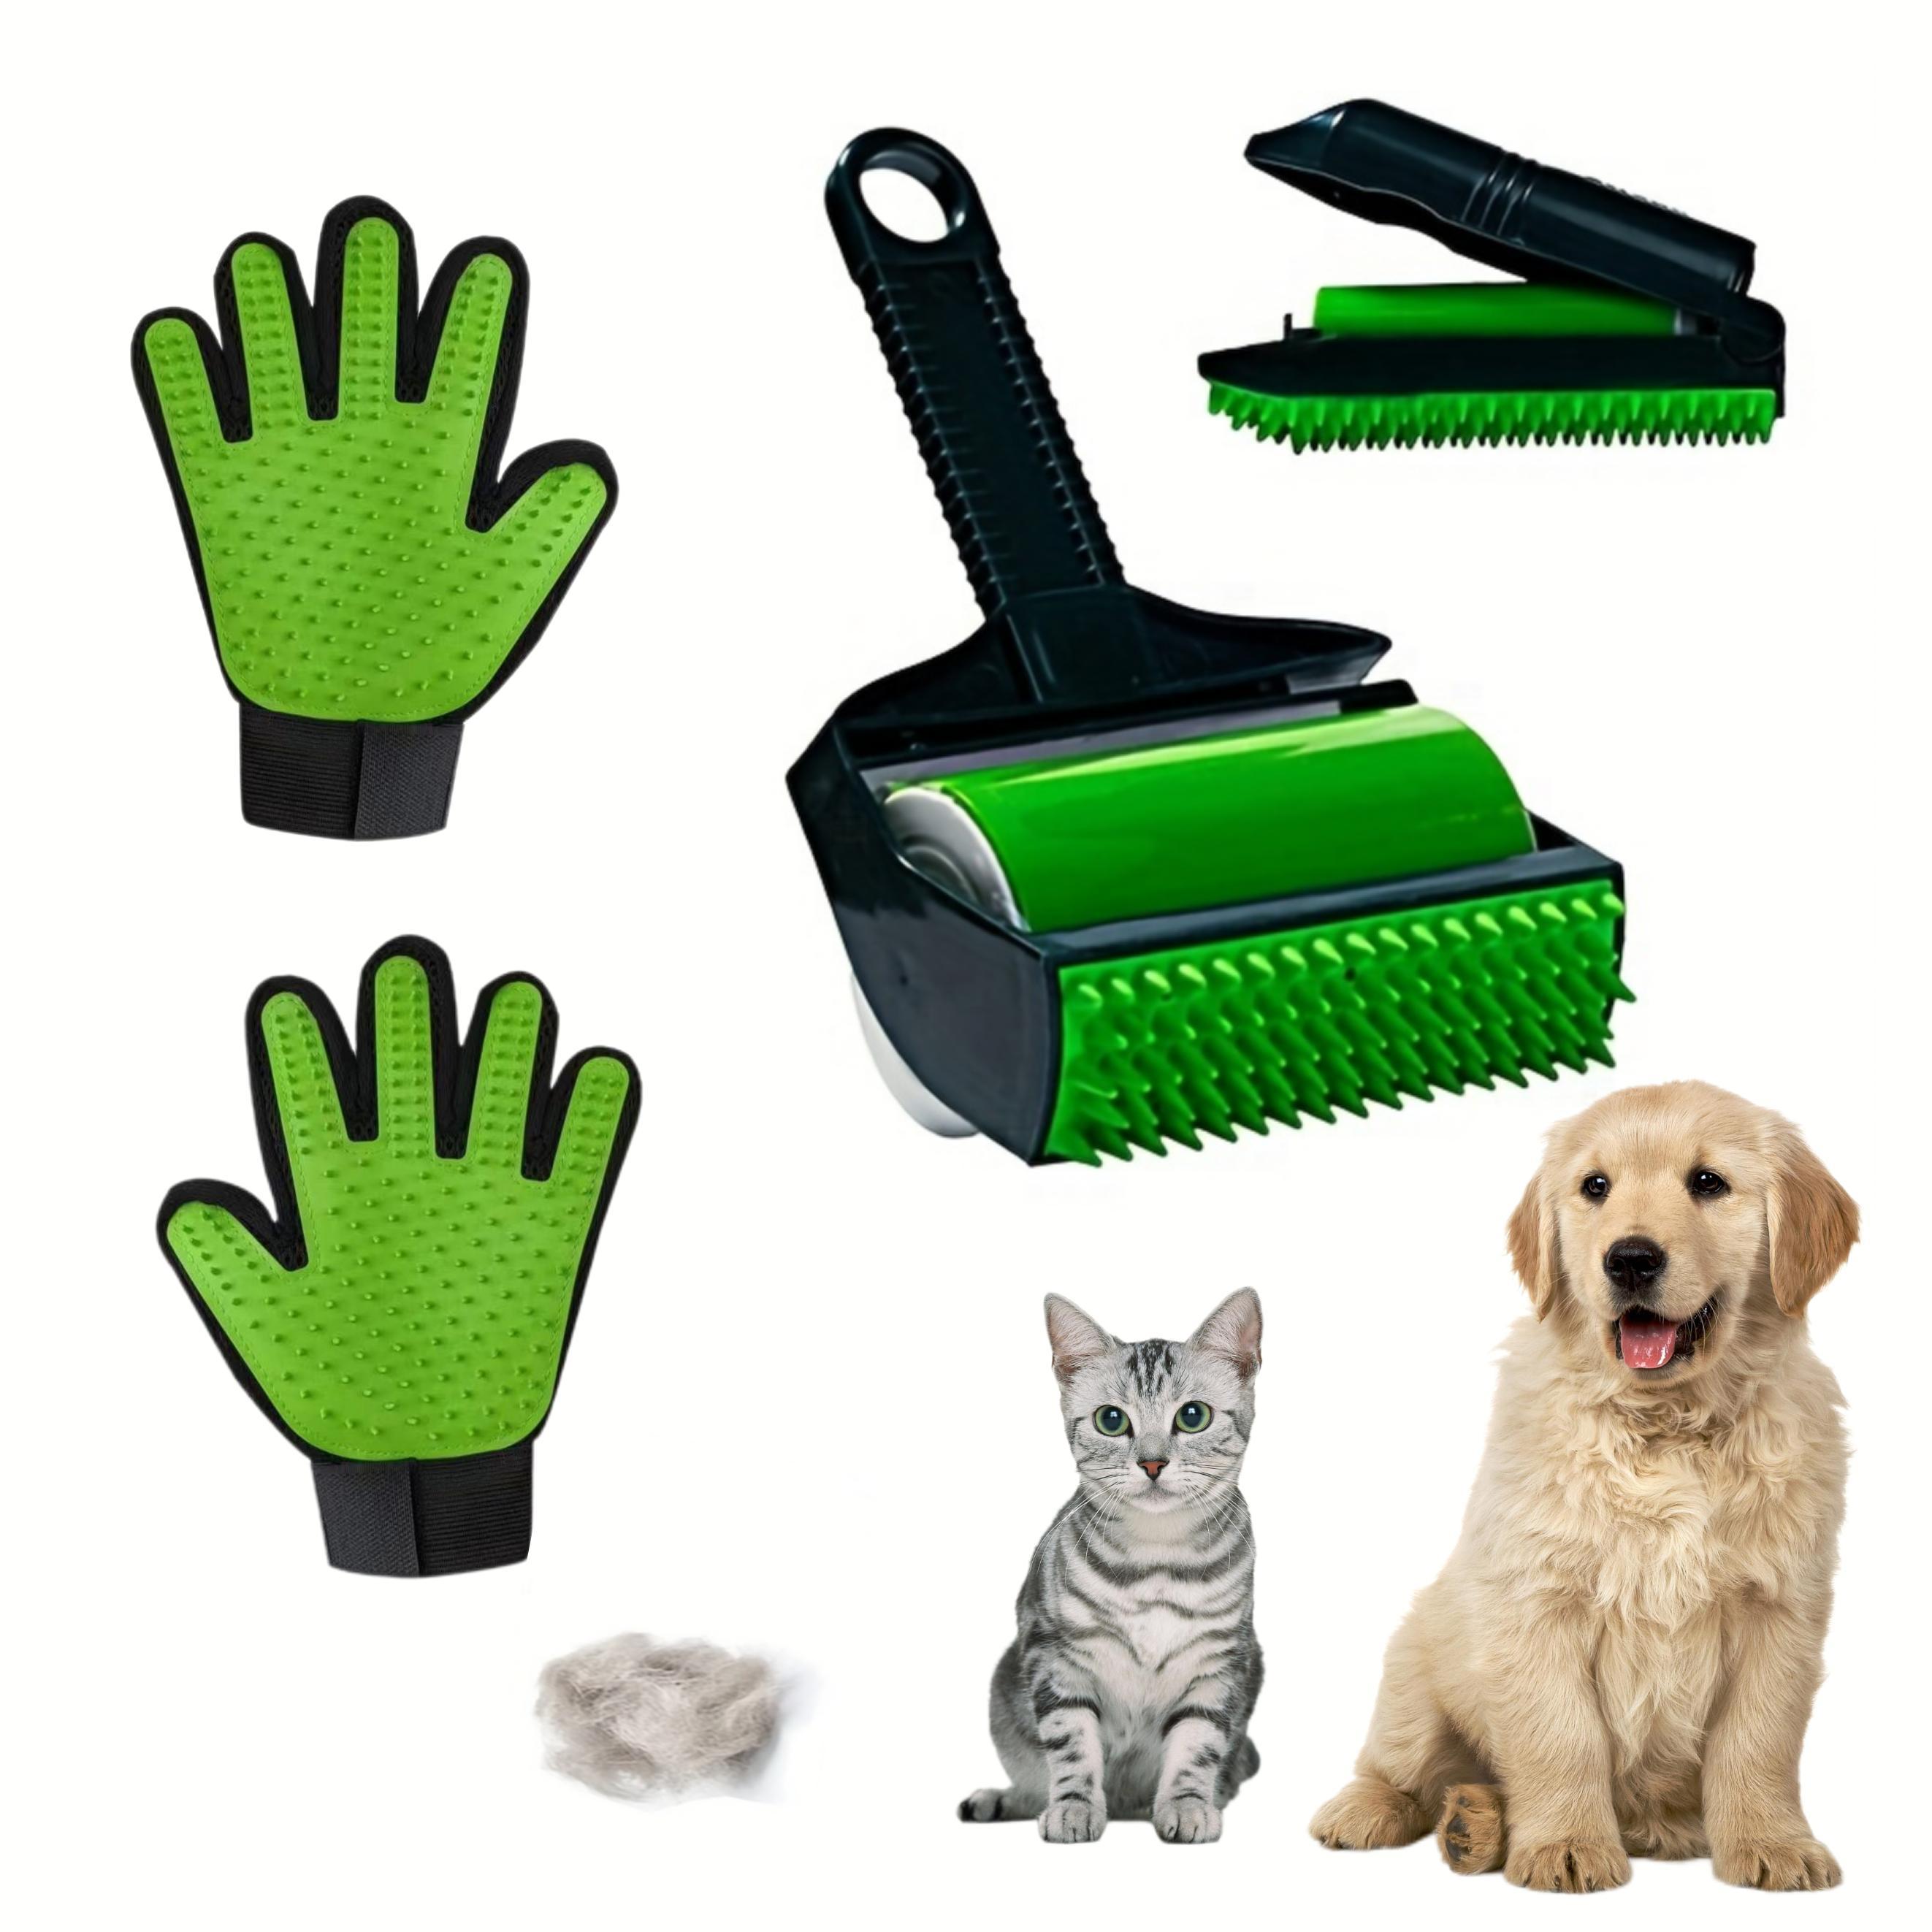 

Pet Hair Remover Set With 2 Lint Rollers & 2 Grooming Gloves, Reusable & Washable, Detachable Handle, For Clothes, Furniture, Carpets, Cars